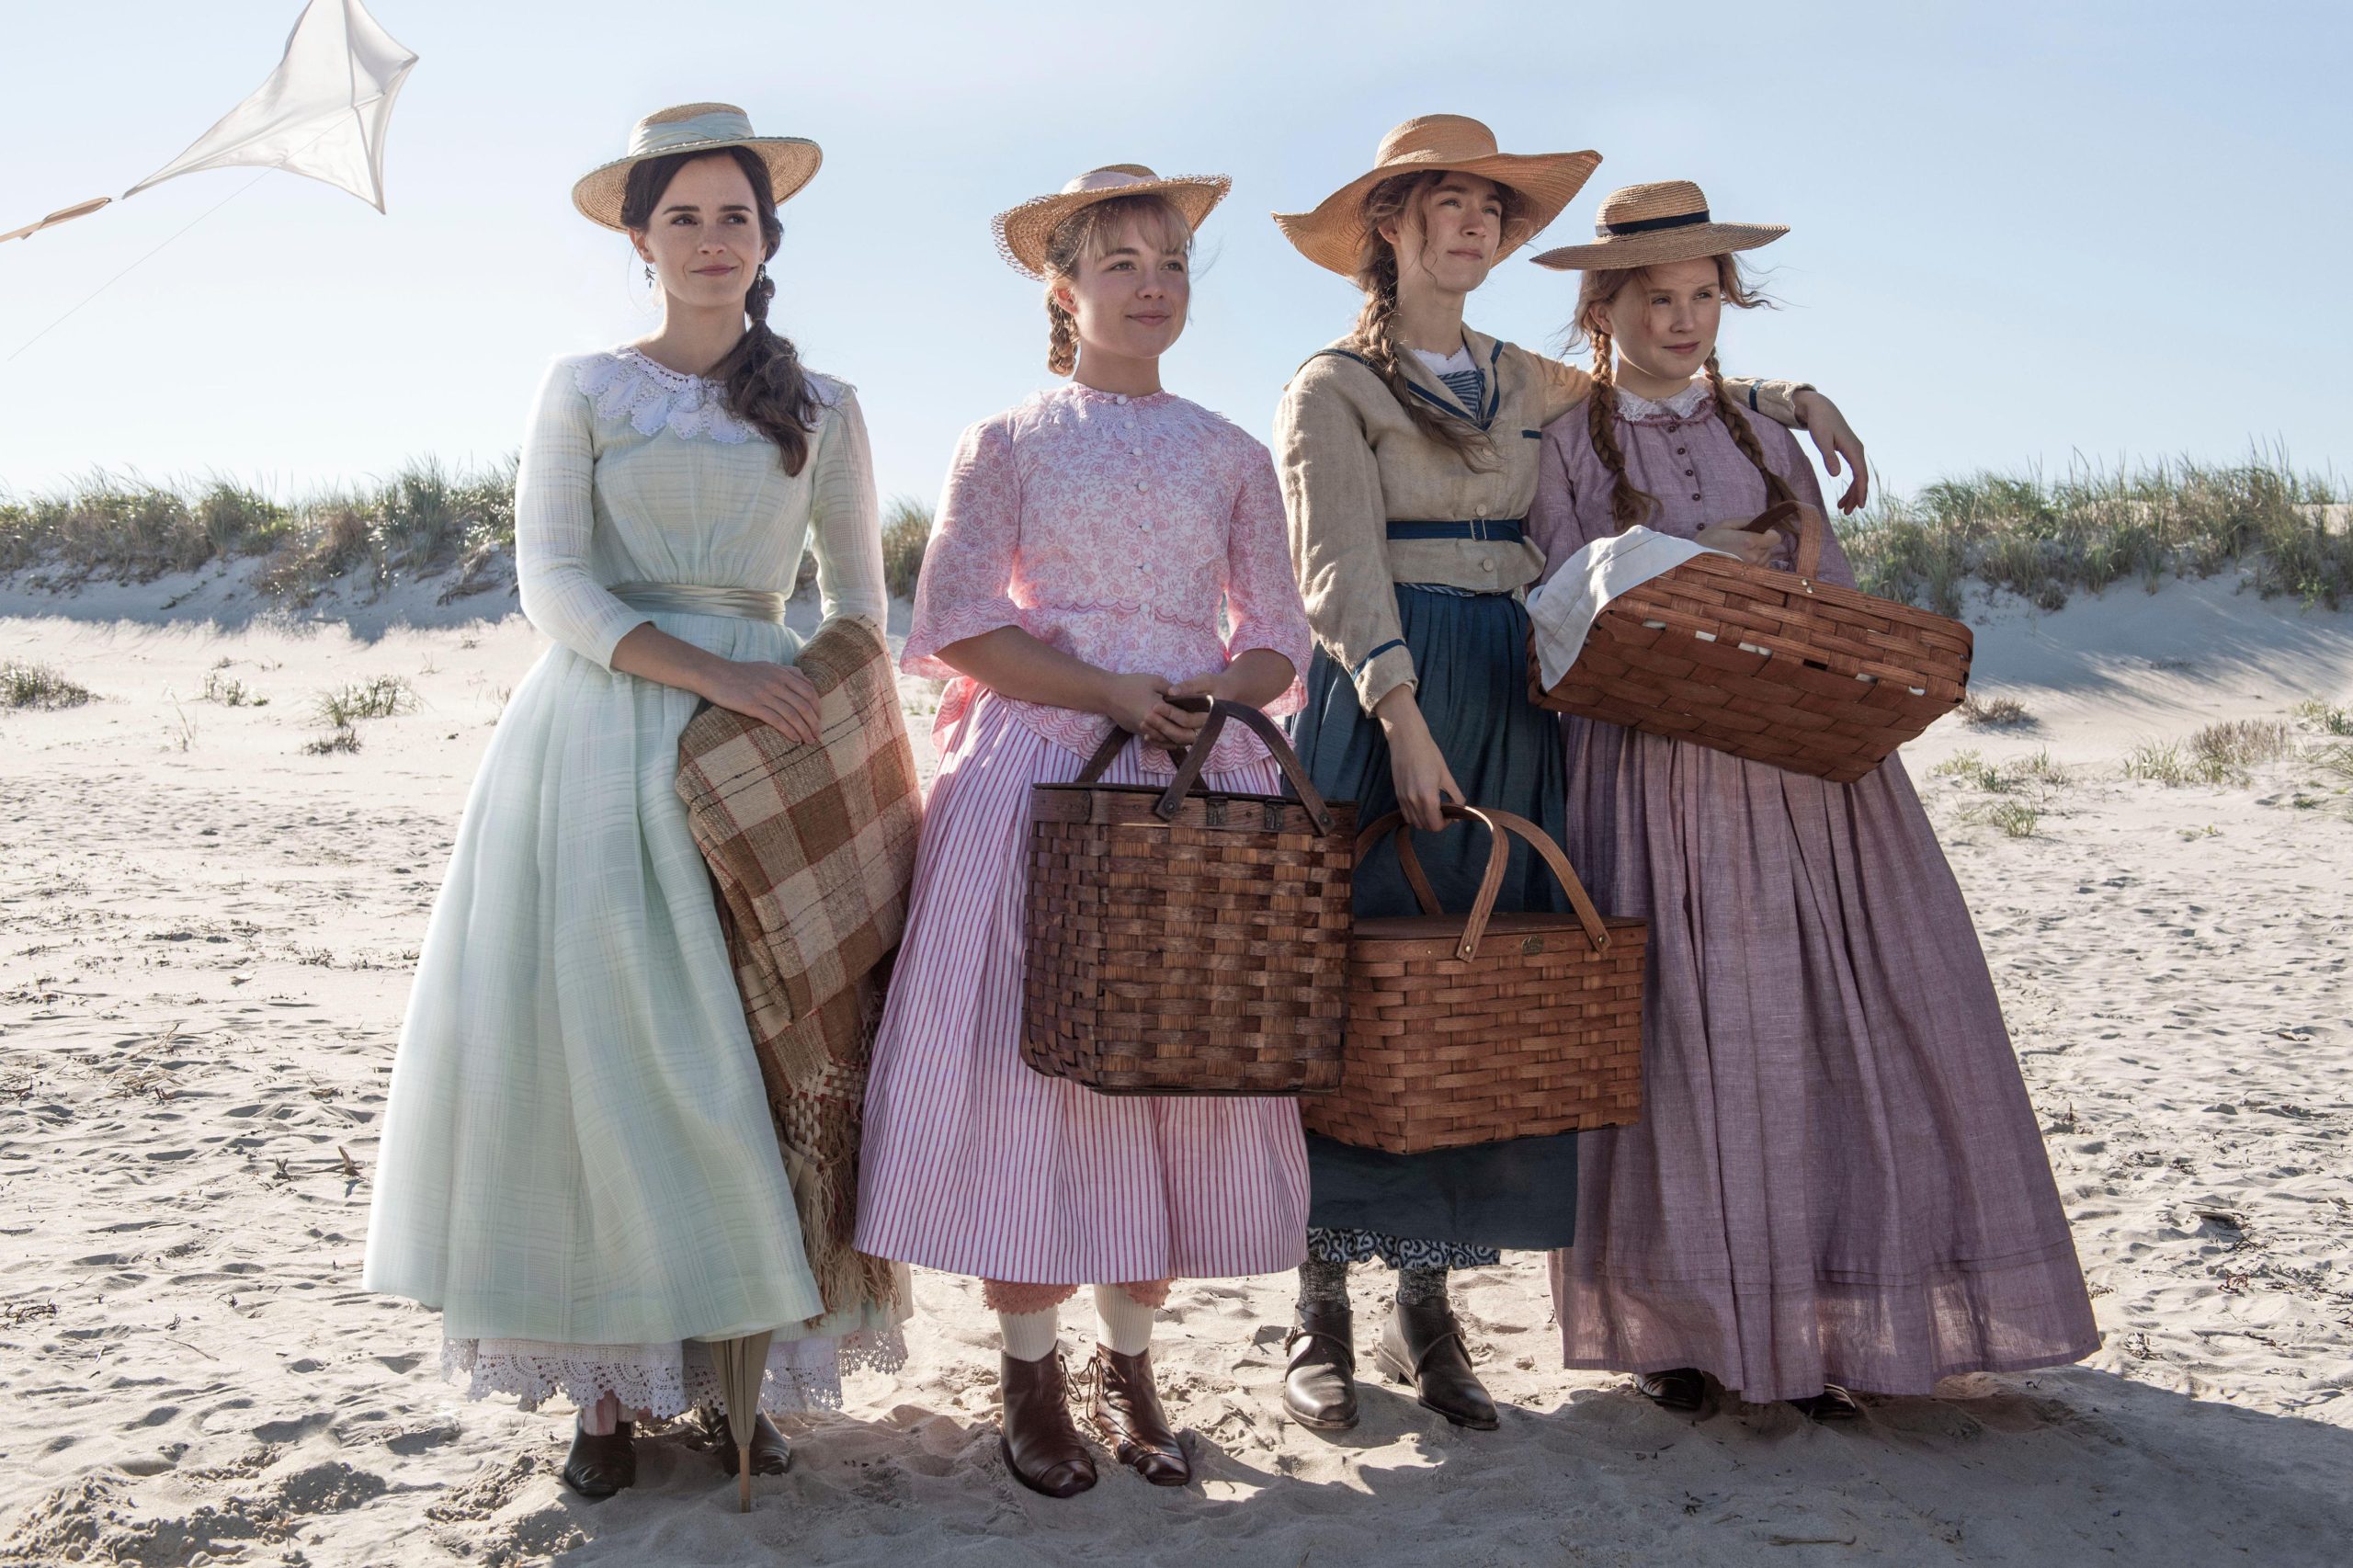 Emma Watson’s Meg March in the recent adaptation of Little Women is characterised by marriage and motherhood